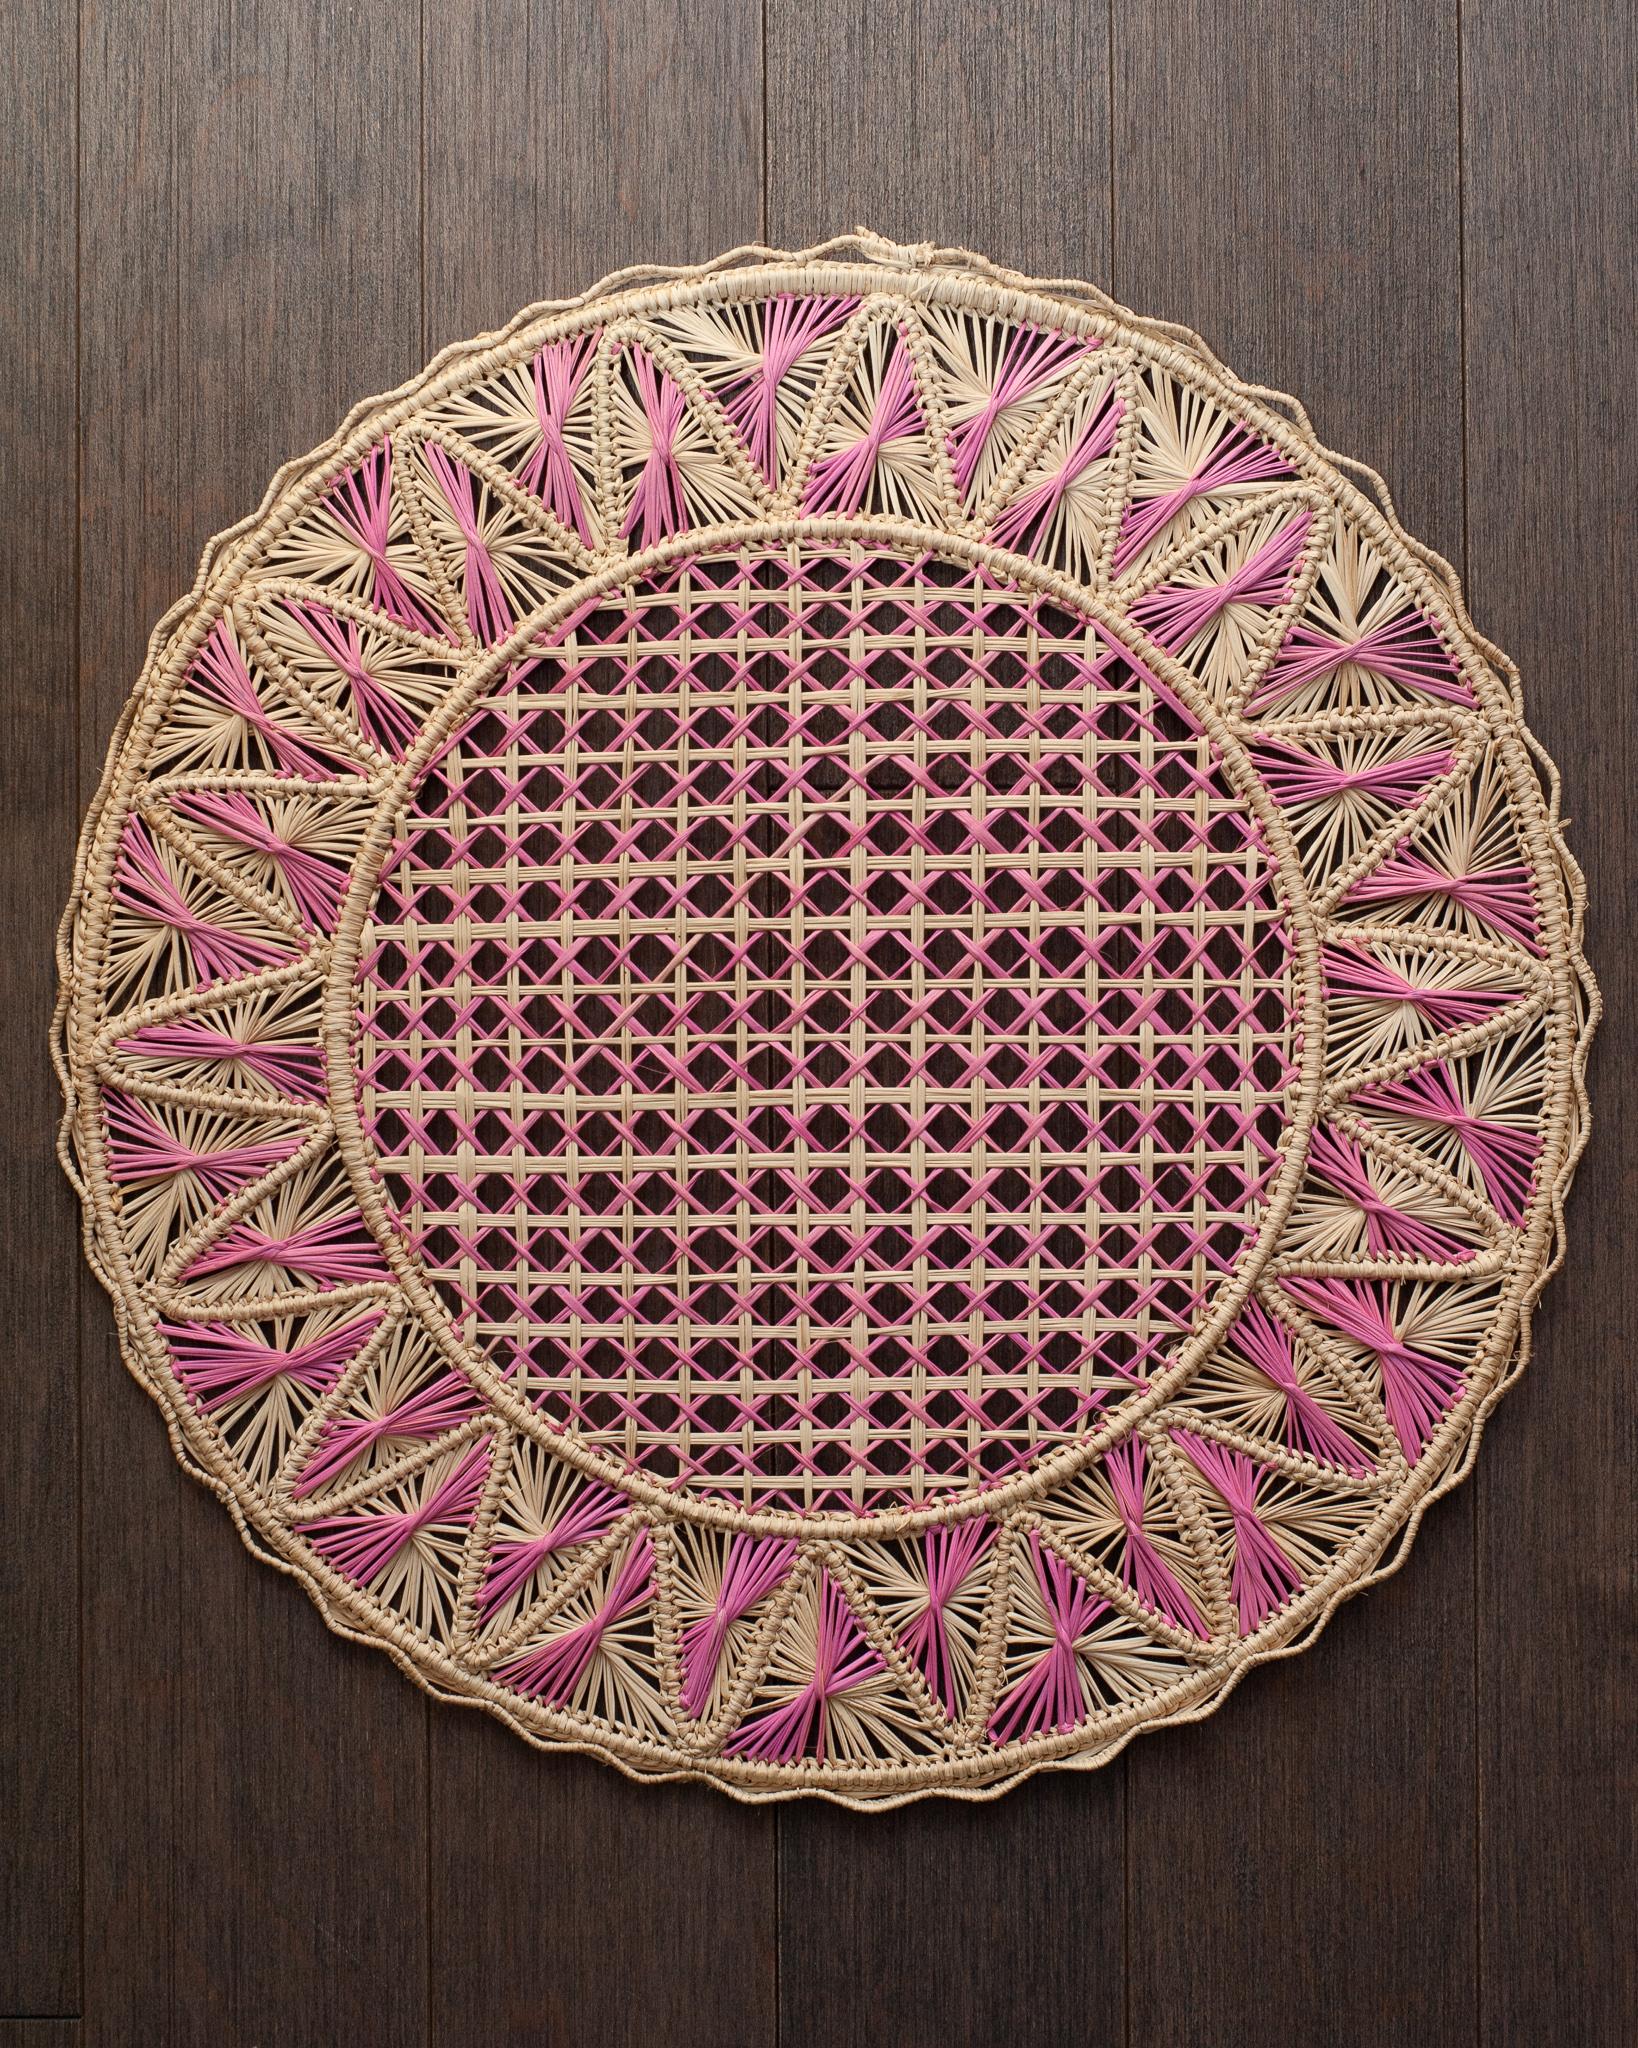 Uplift your table with these stunning handwoven rattan placemats in natural and pink rattan. Finely crafted by expert artisans, these pieces all showcase the classical technique of weaving in a modern way. From Jean Michel Frank to the House of